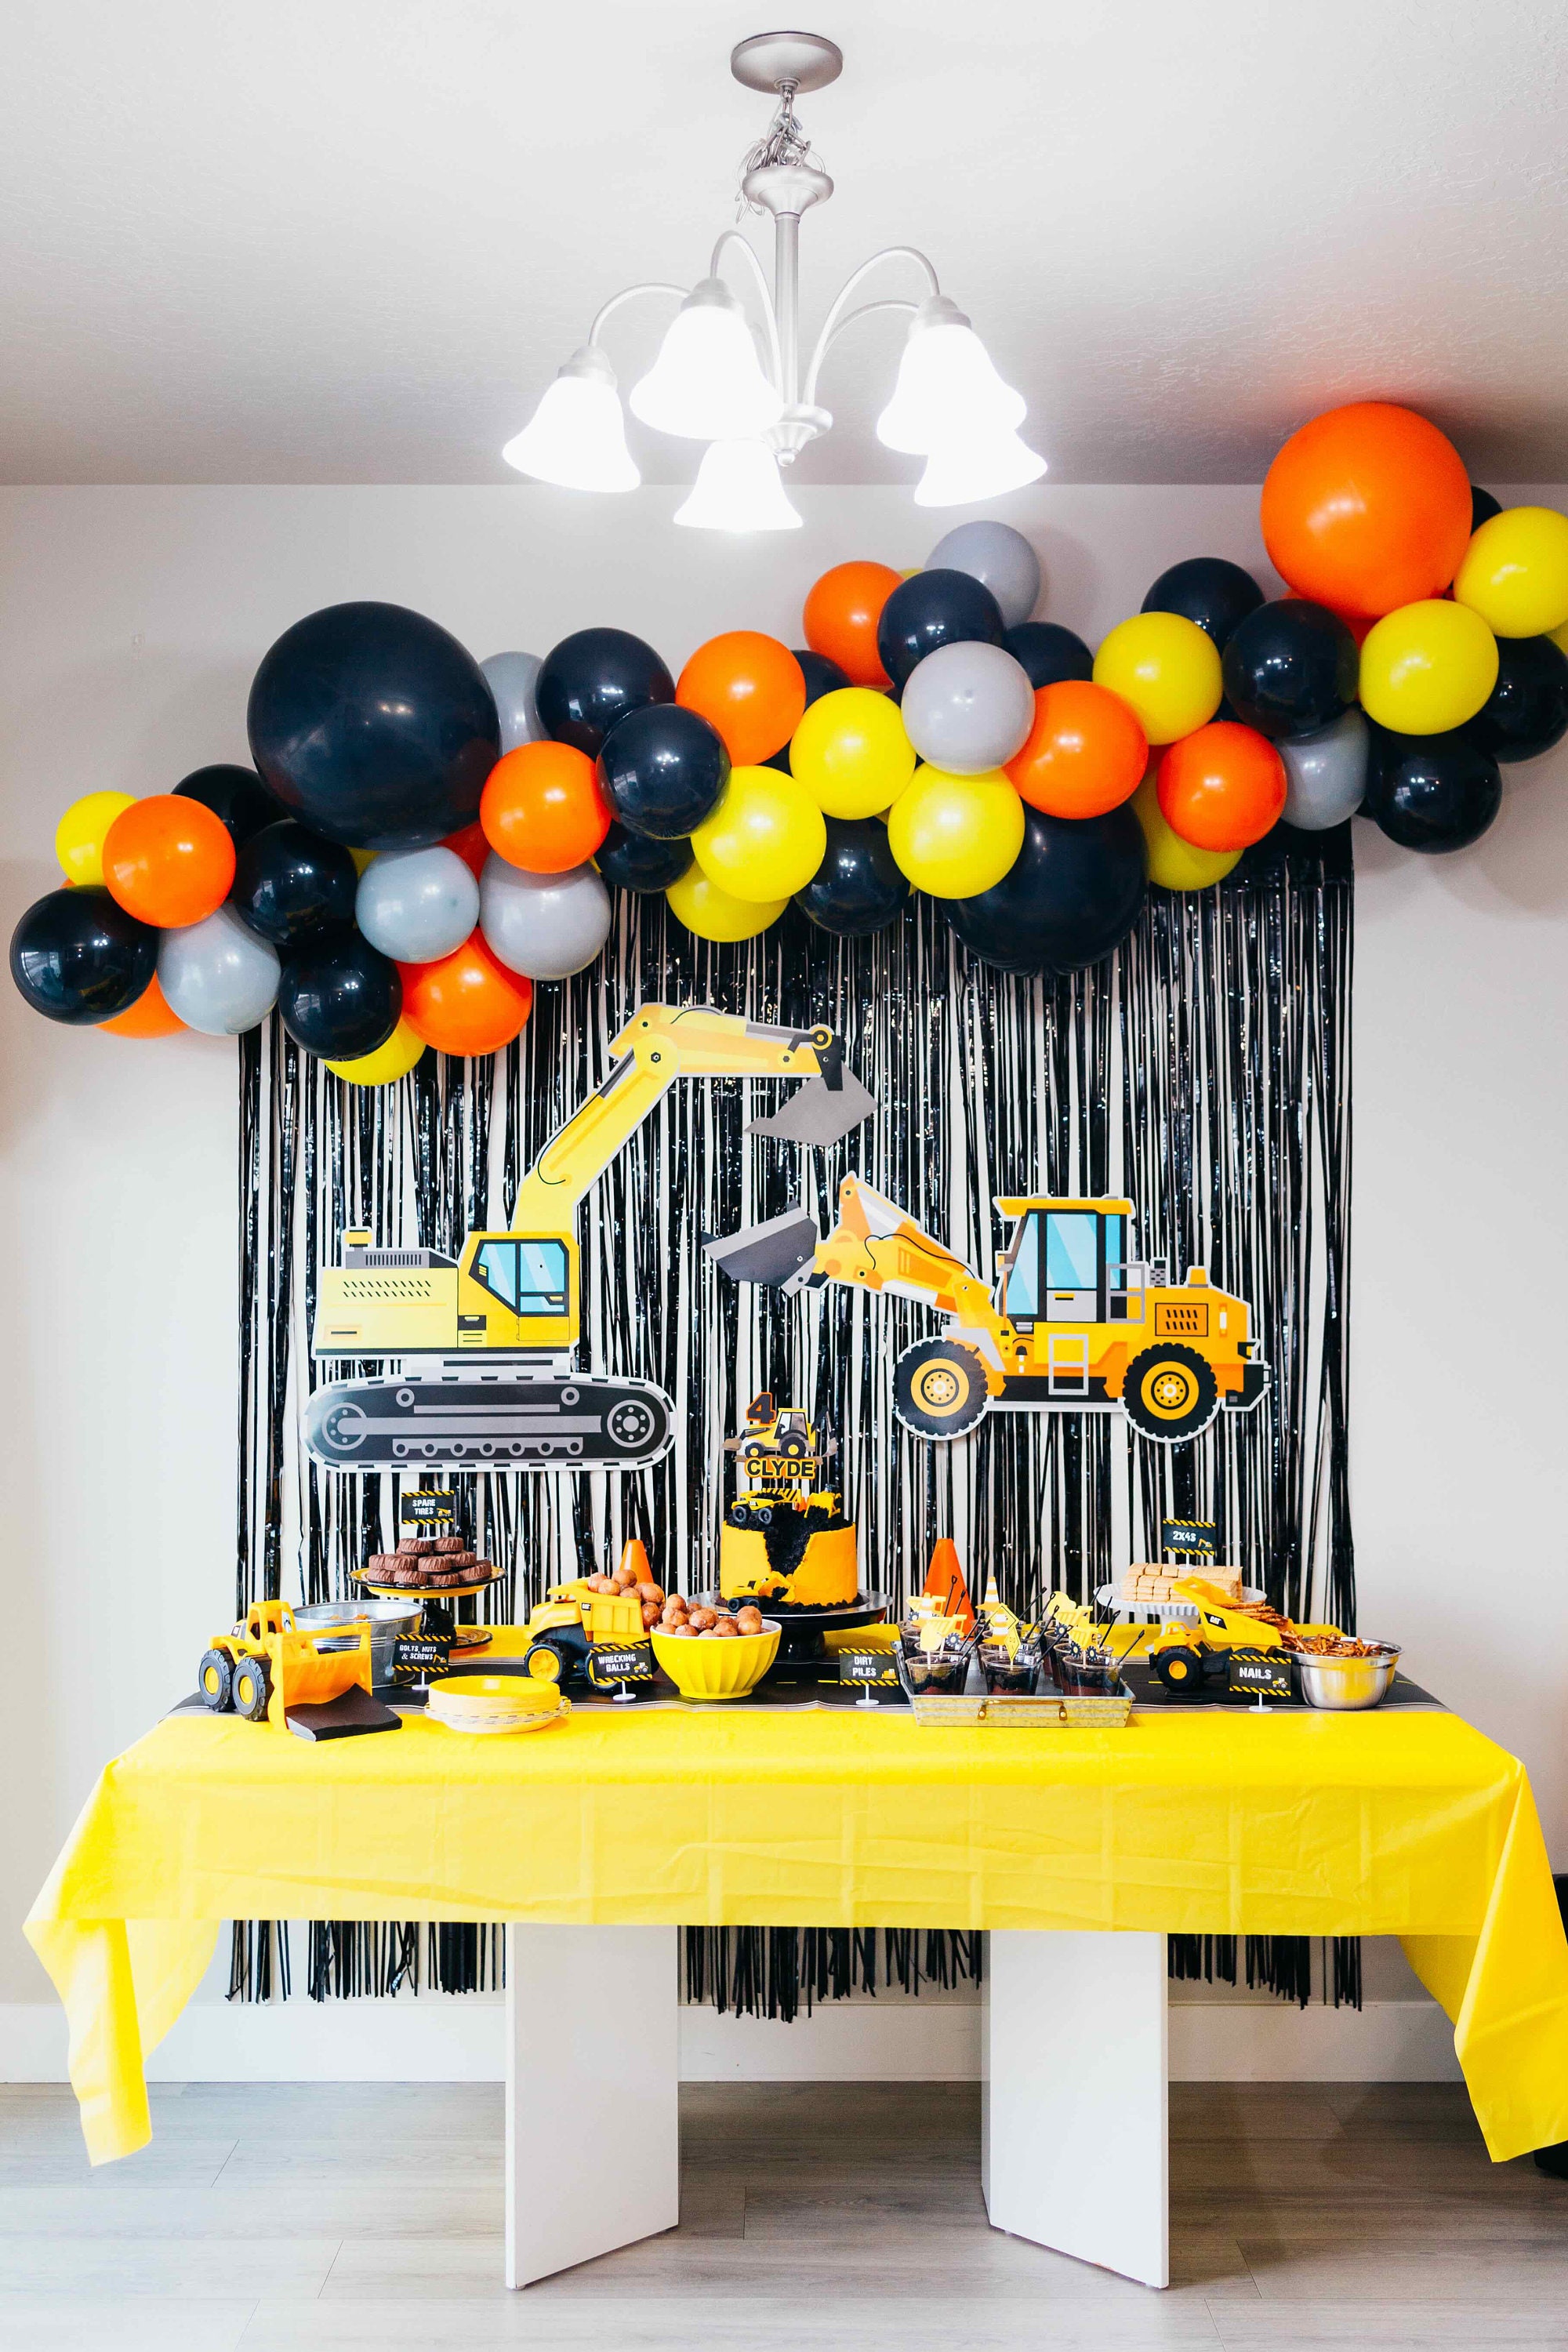 Excavator Suncatcher Craft Kit Construction Birthday Party Activity for  Toddlers and Children Digger DIY Art Party Favors for Kids 